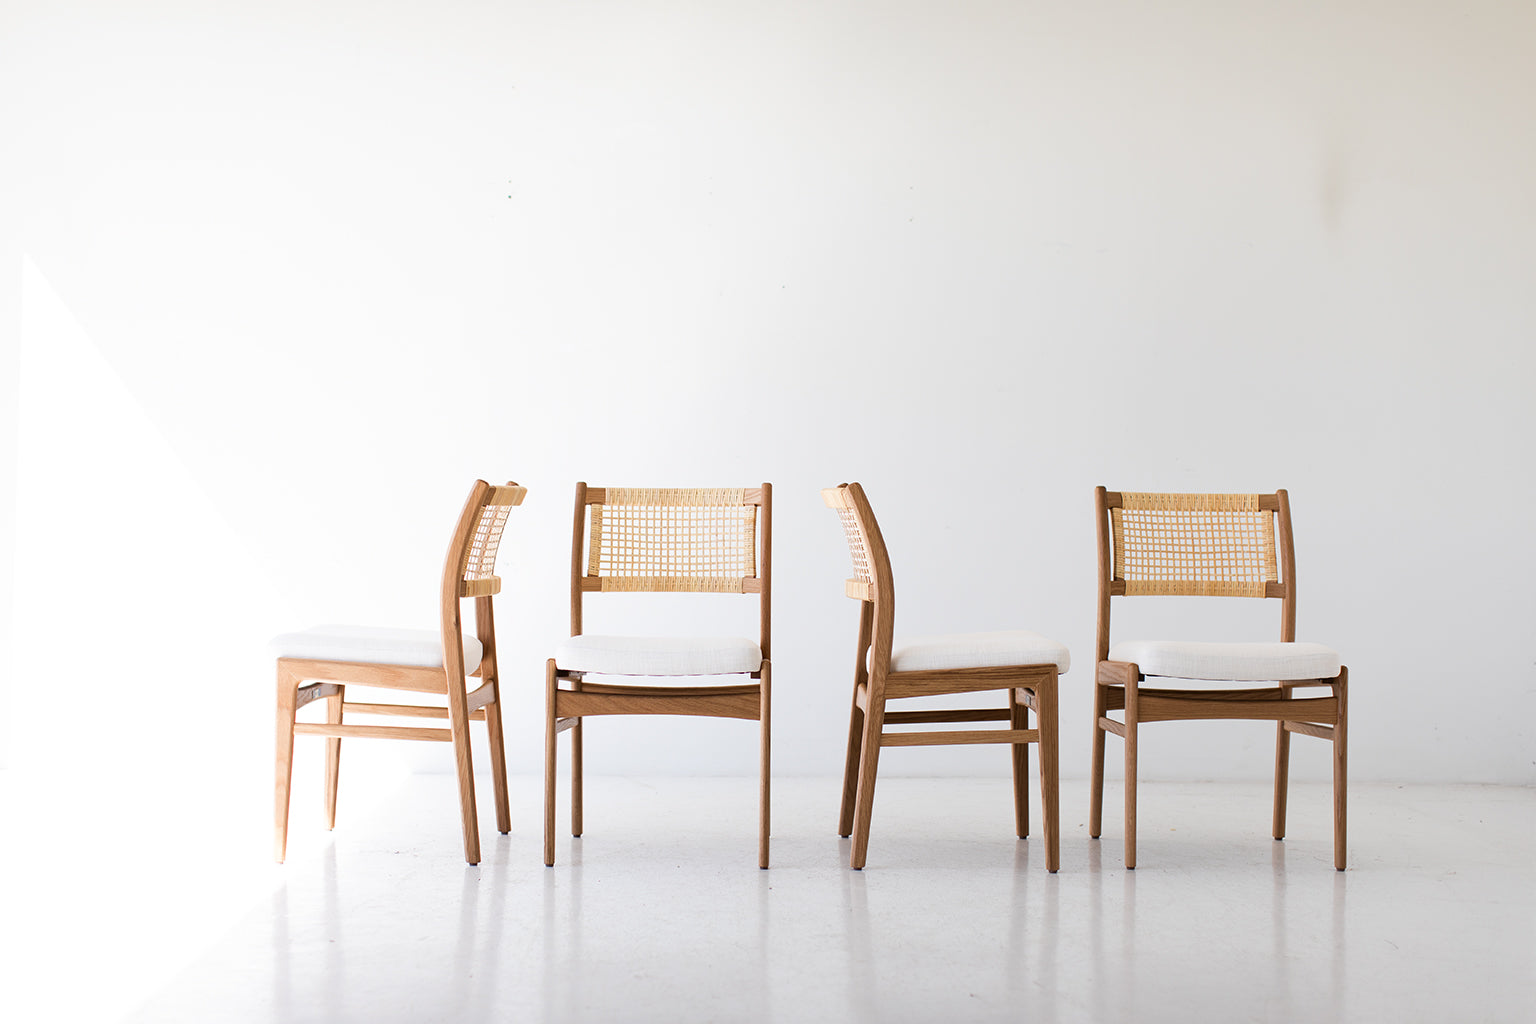      tribute-modern-dining-chairs-cane-oak-t1002-02